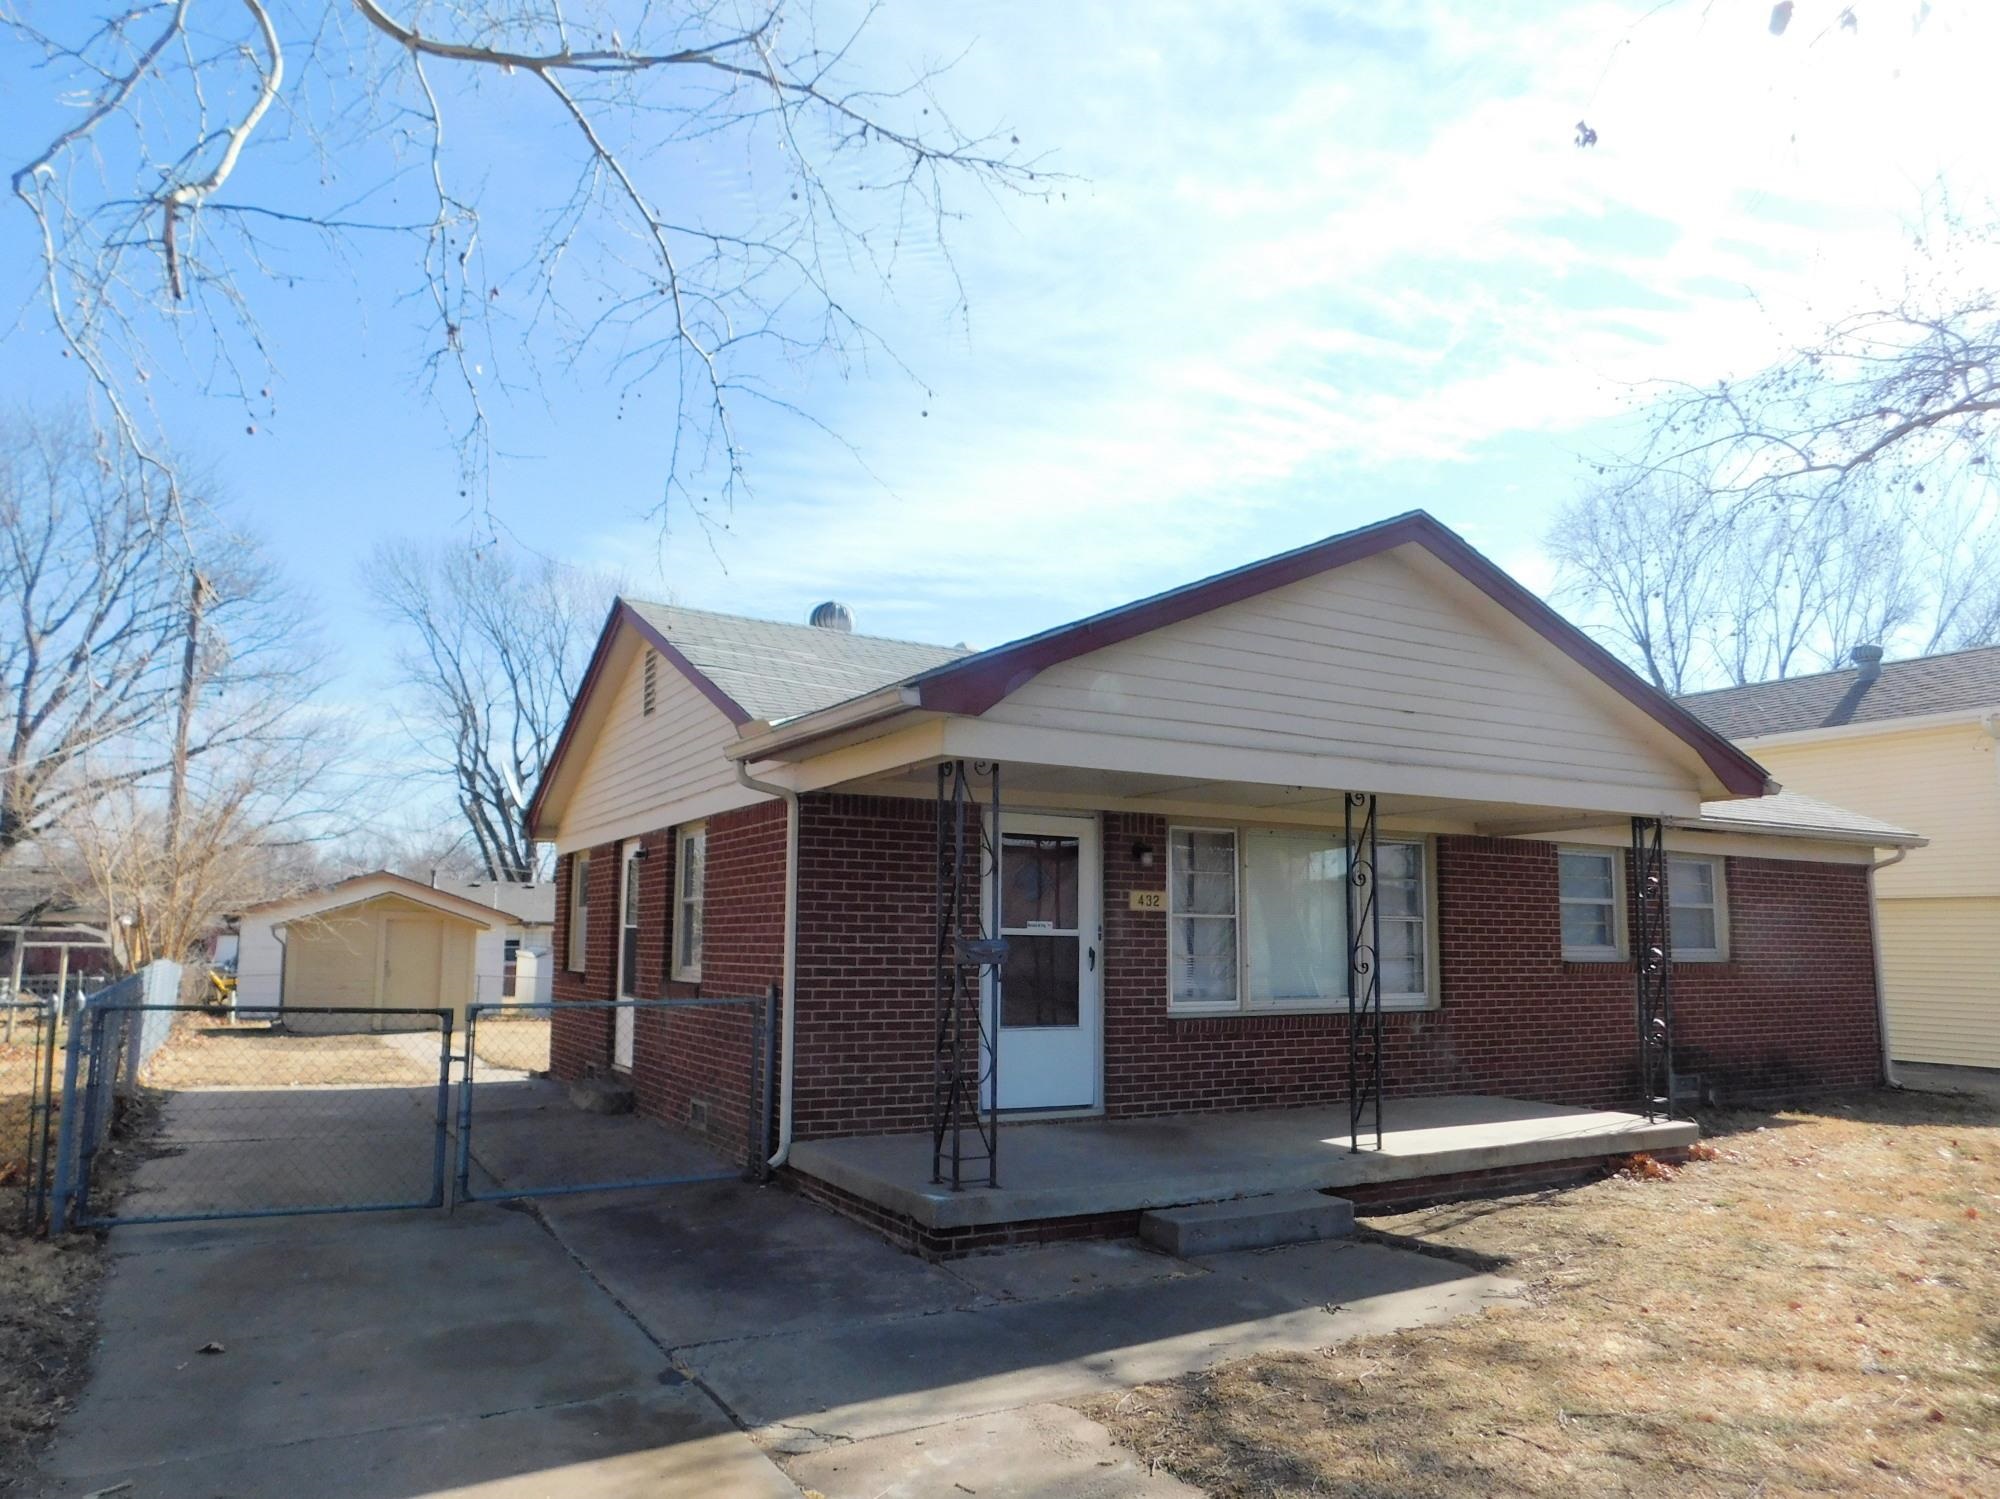 Nice Opportunity for 3 bedroom ranch style brick home well maintained condition. New carpeting throu